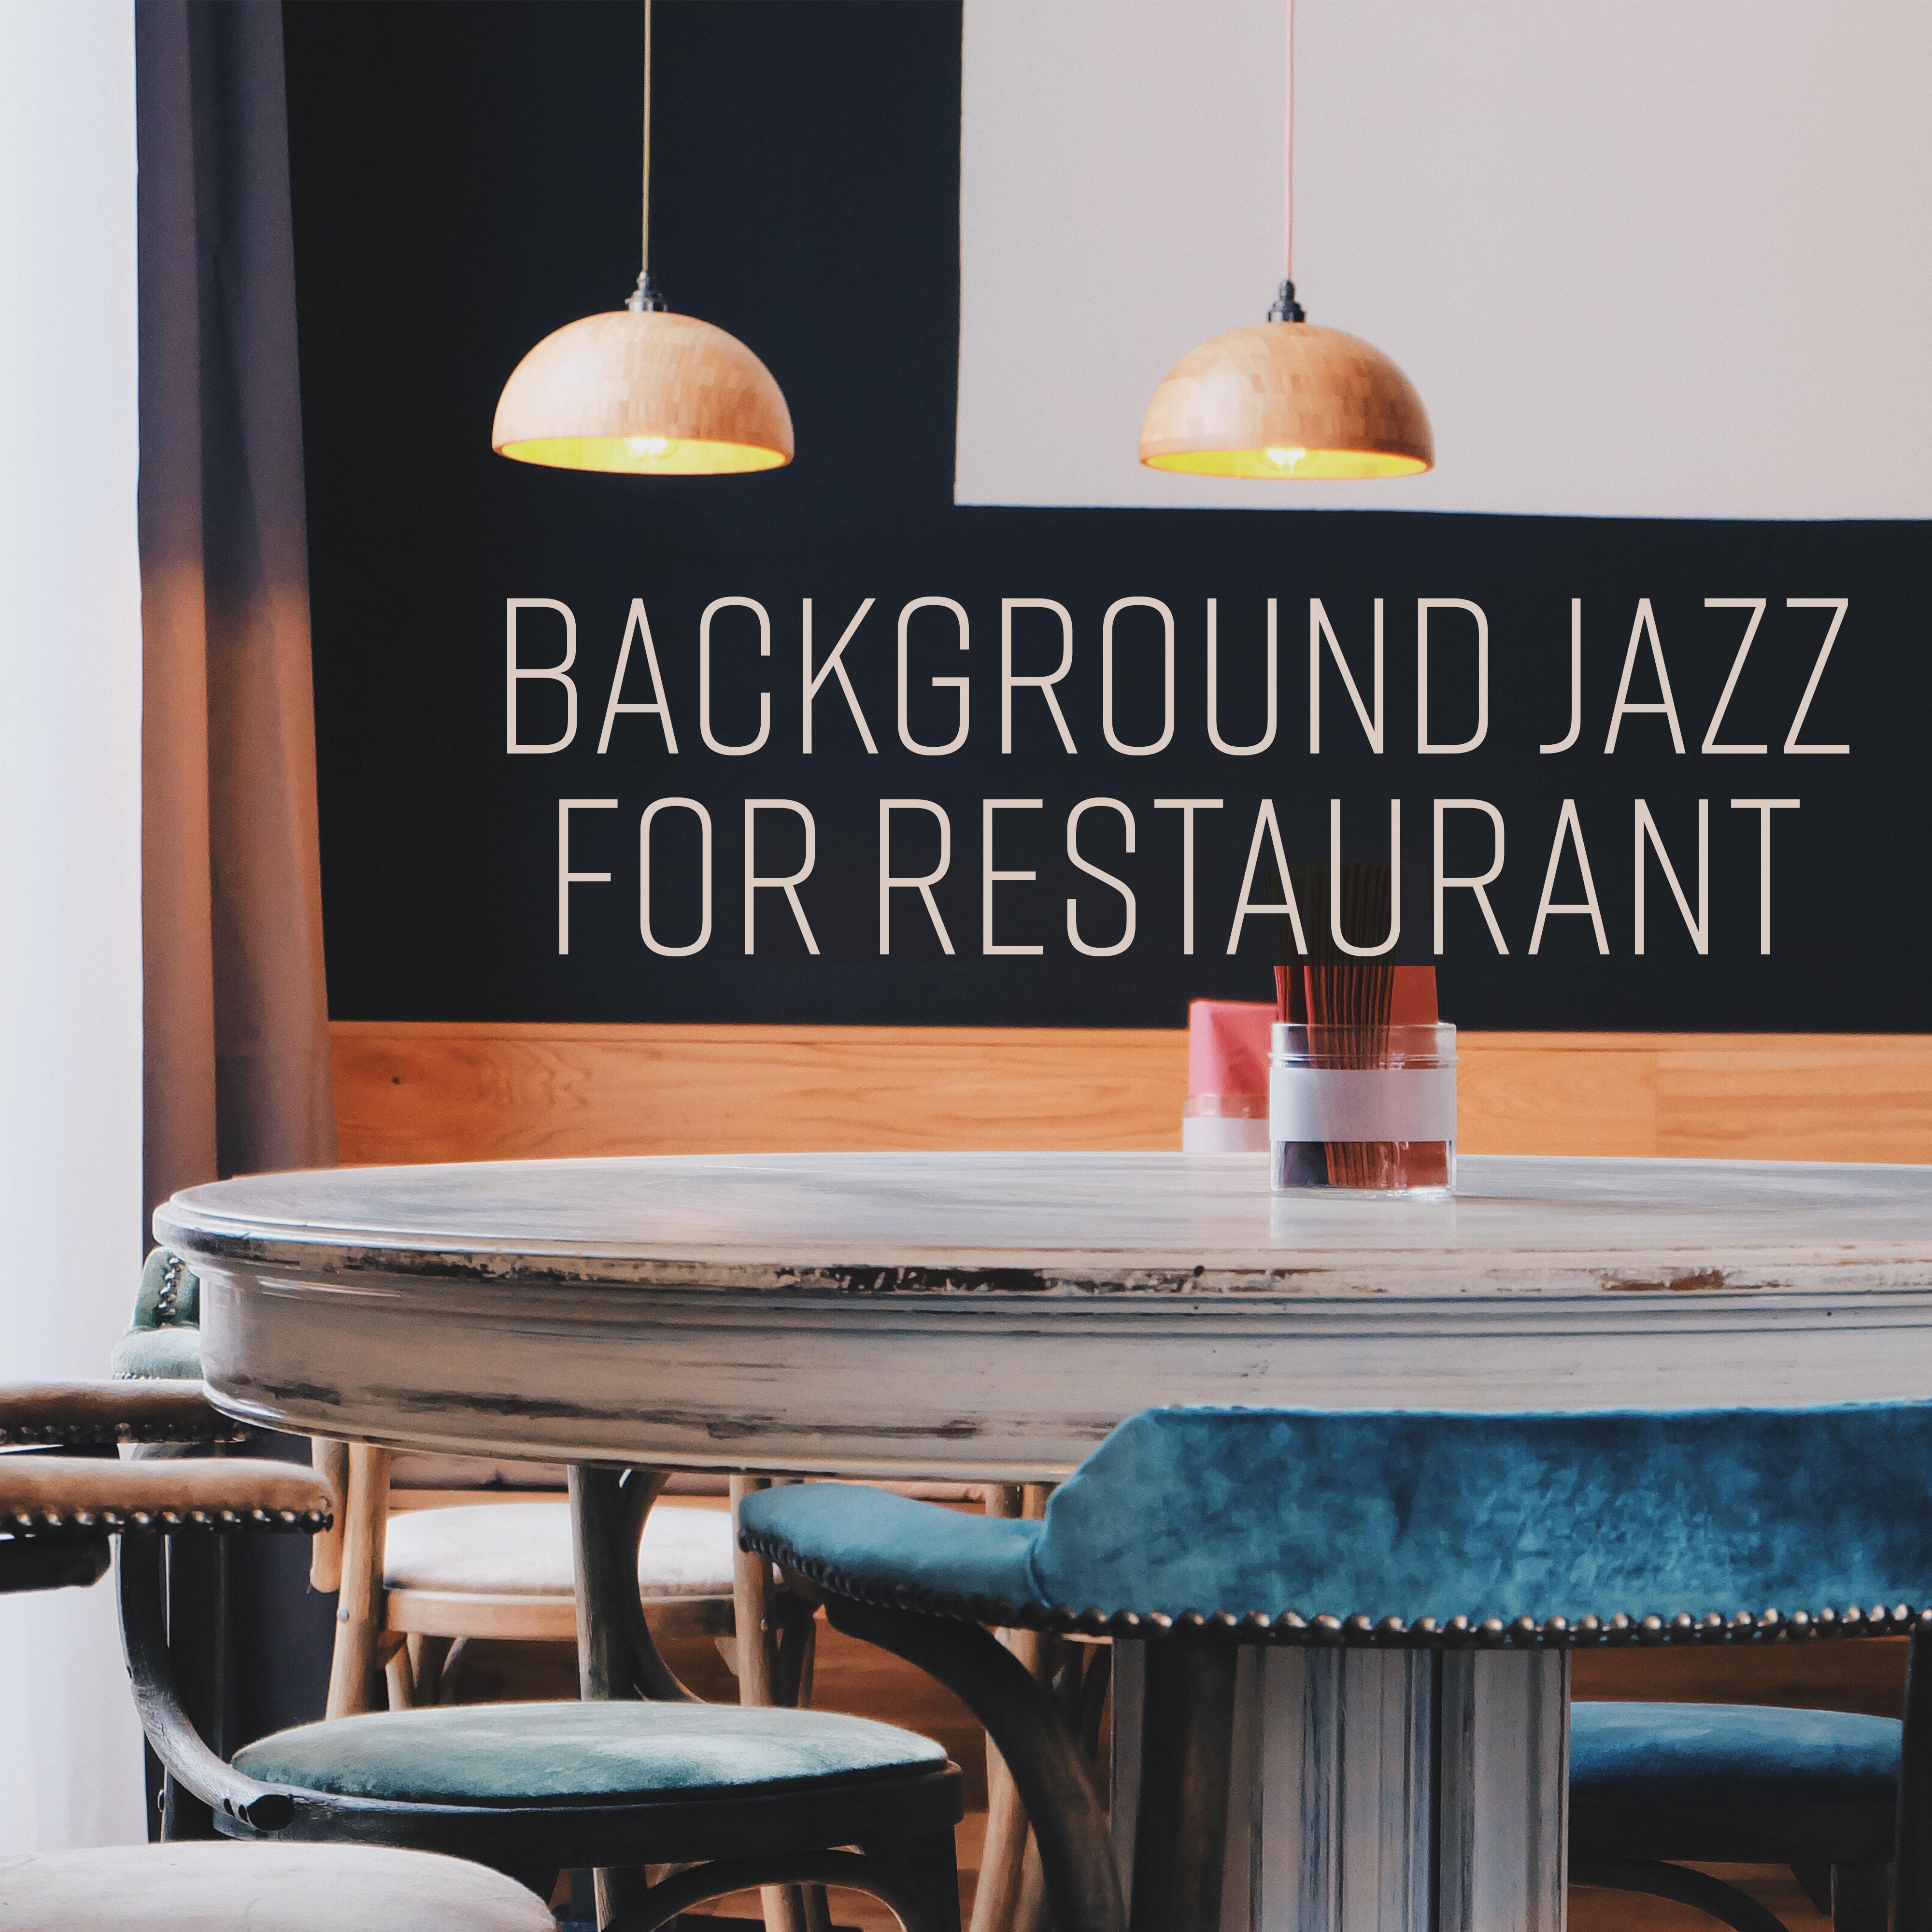 Background Jazz for Restaurant  Smooth Music, Meeting with Jazz Sounds, Coffee Time, Easy Listening